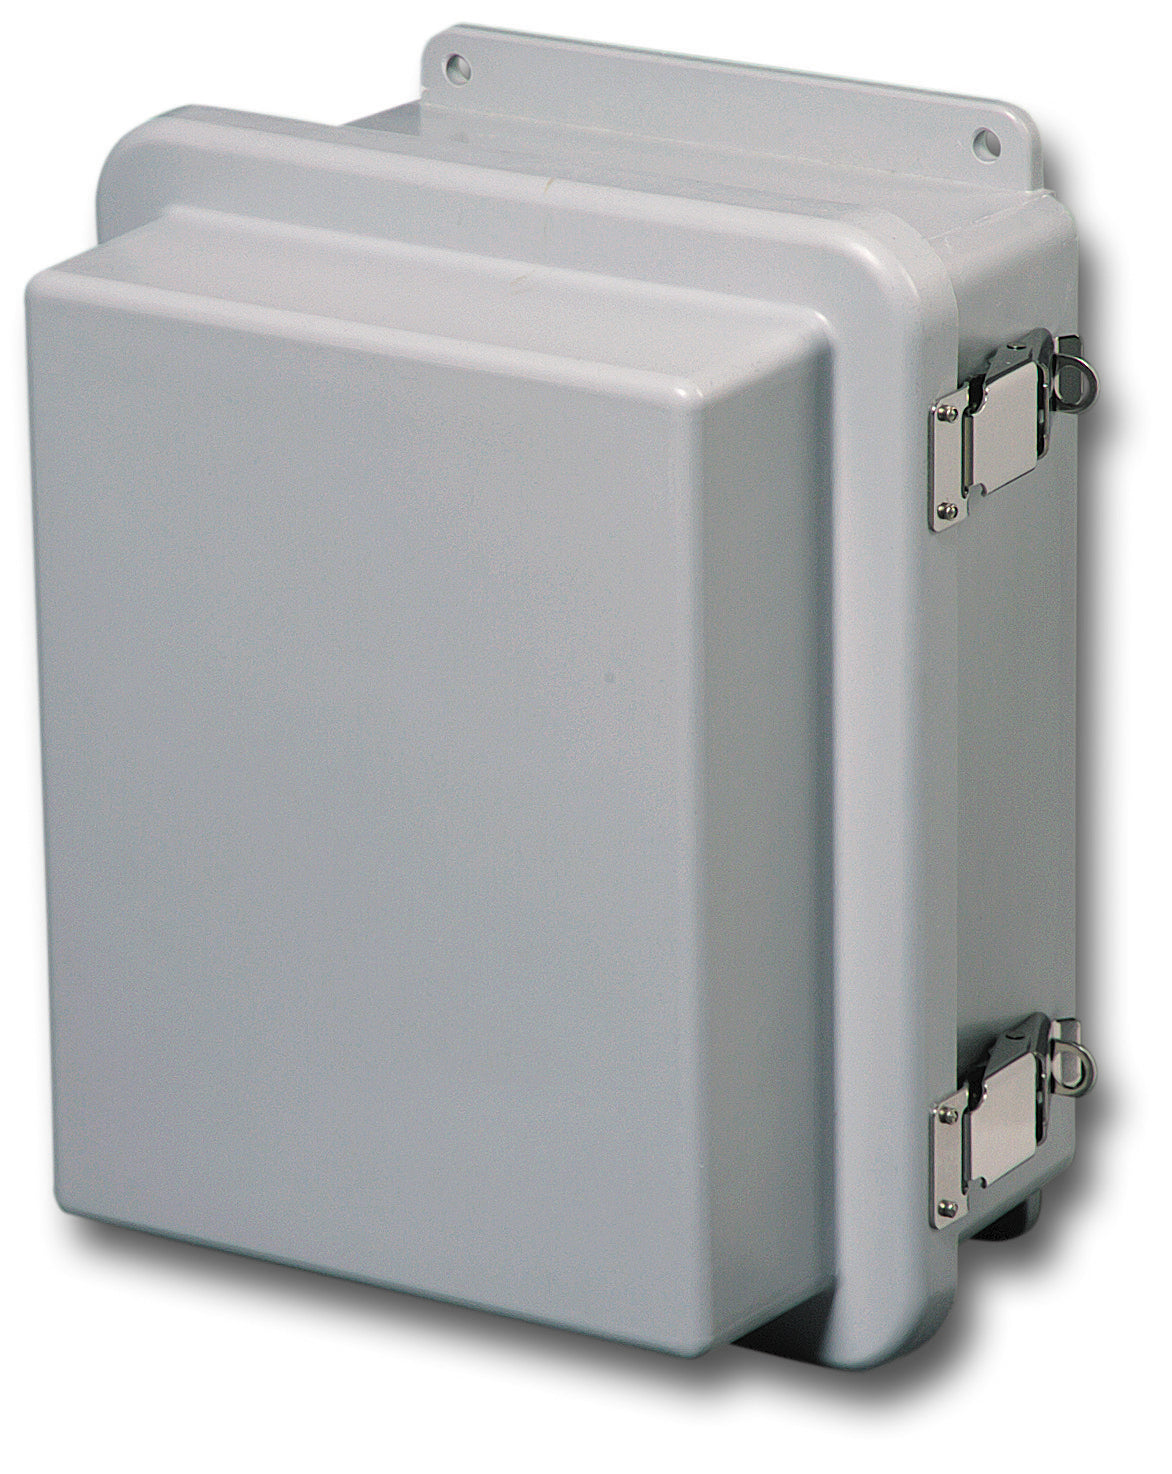 N4X   FG   RCHQR Series     Fiberglass Enclosures with Raised Hinged Cover and Quick Release Latch-1